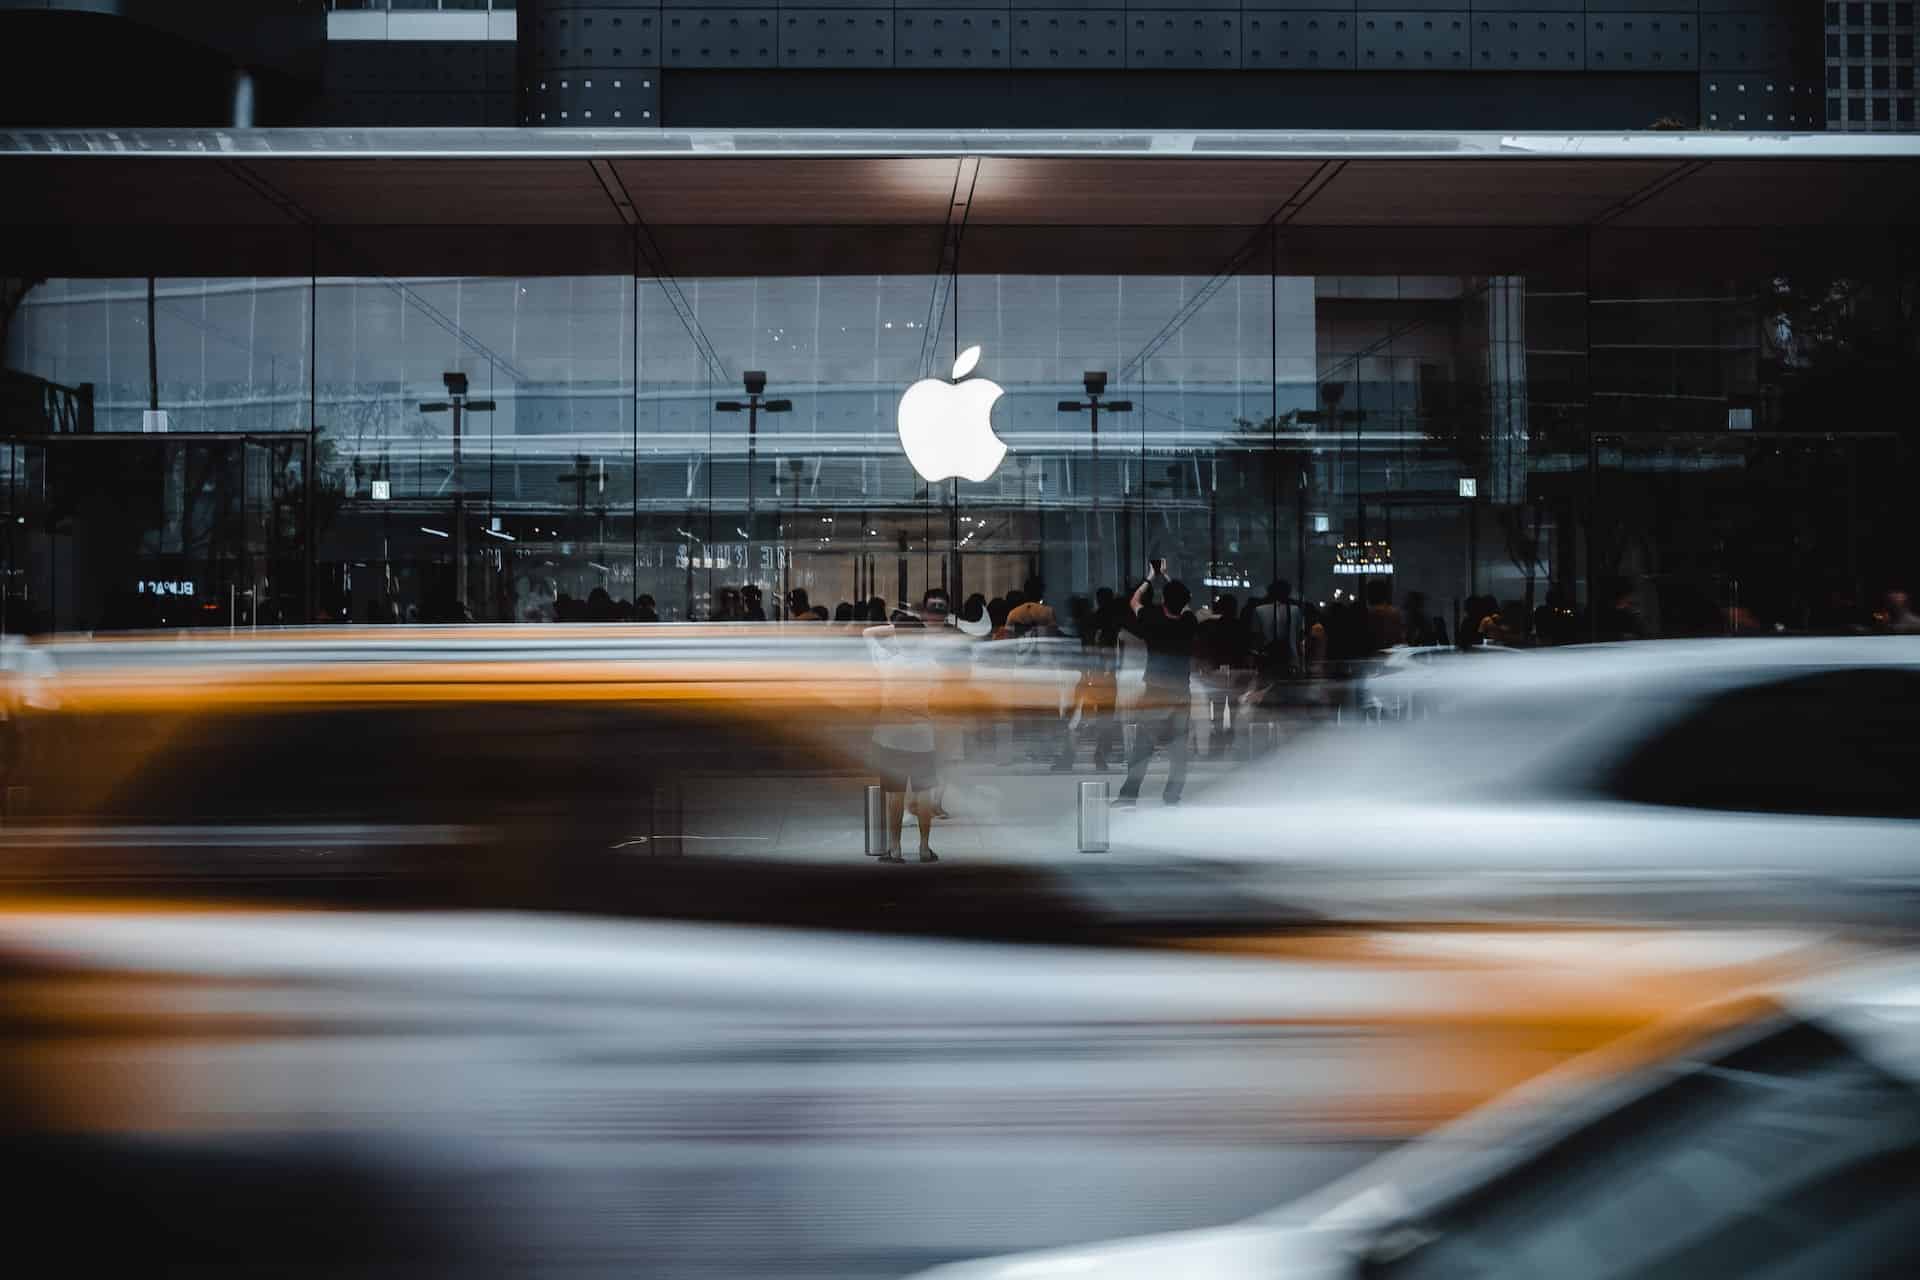 Apple store image from Unsplash